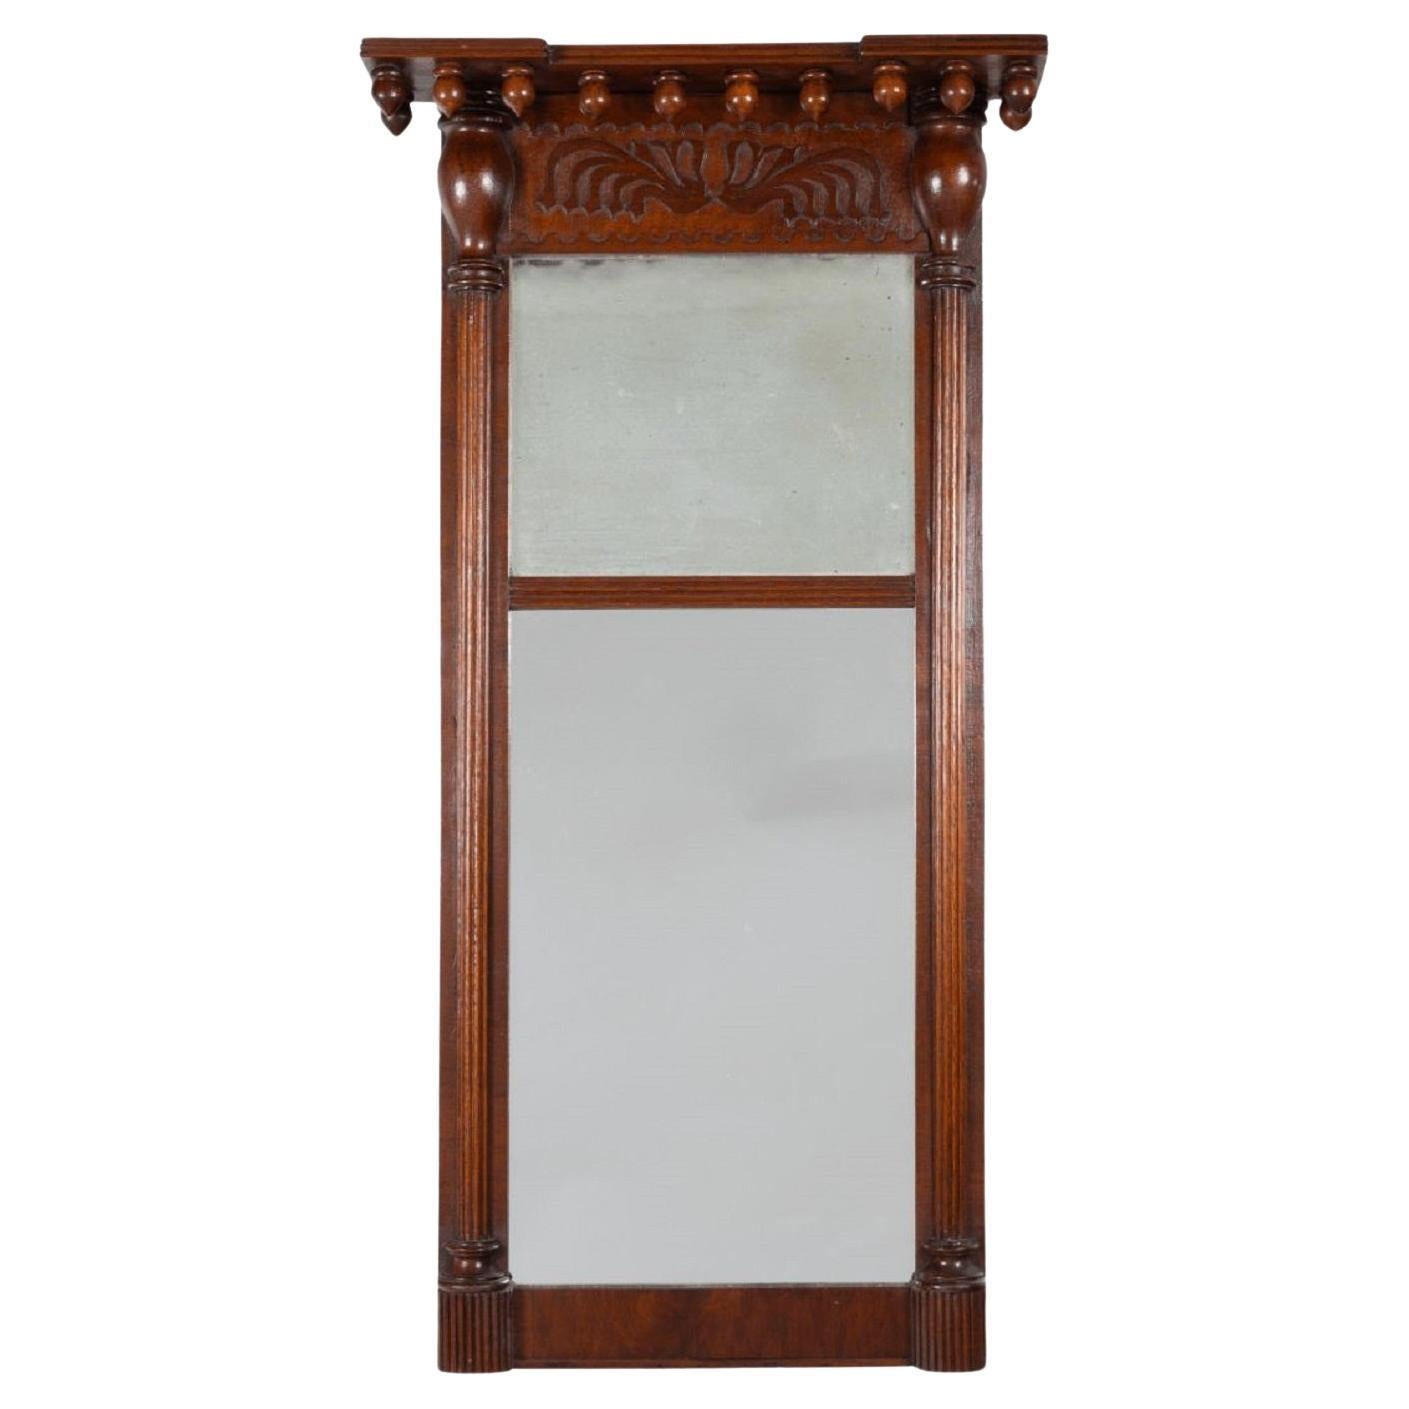 Early 19th Century American Mahogany Tabernacle Pier Mirror For Sale